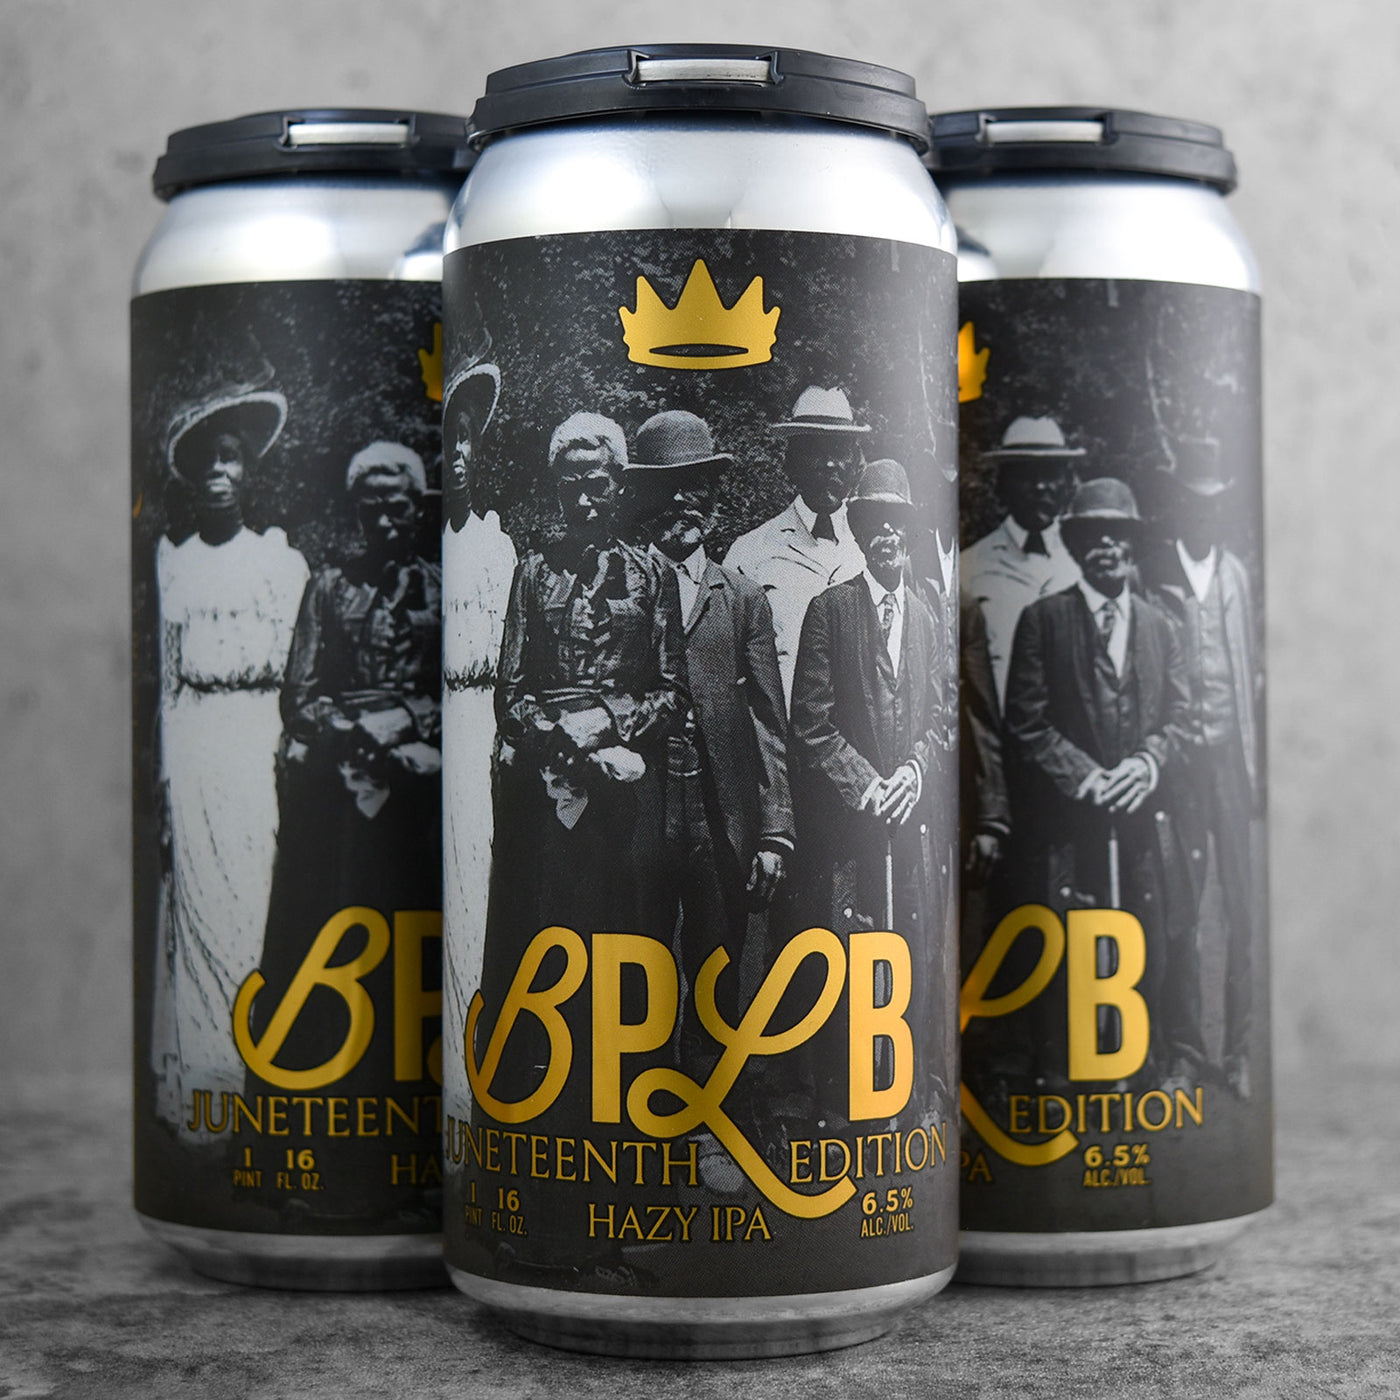 Crowns & Hops BPLB Juneteenth Edition